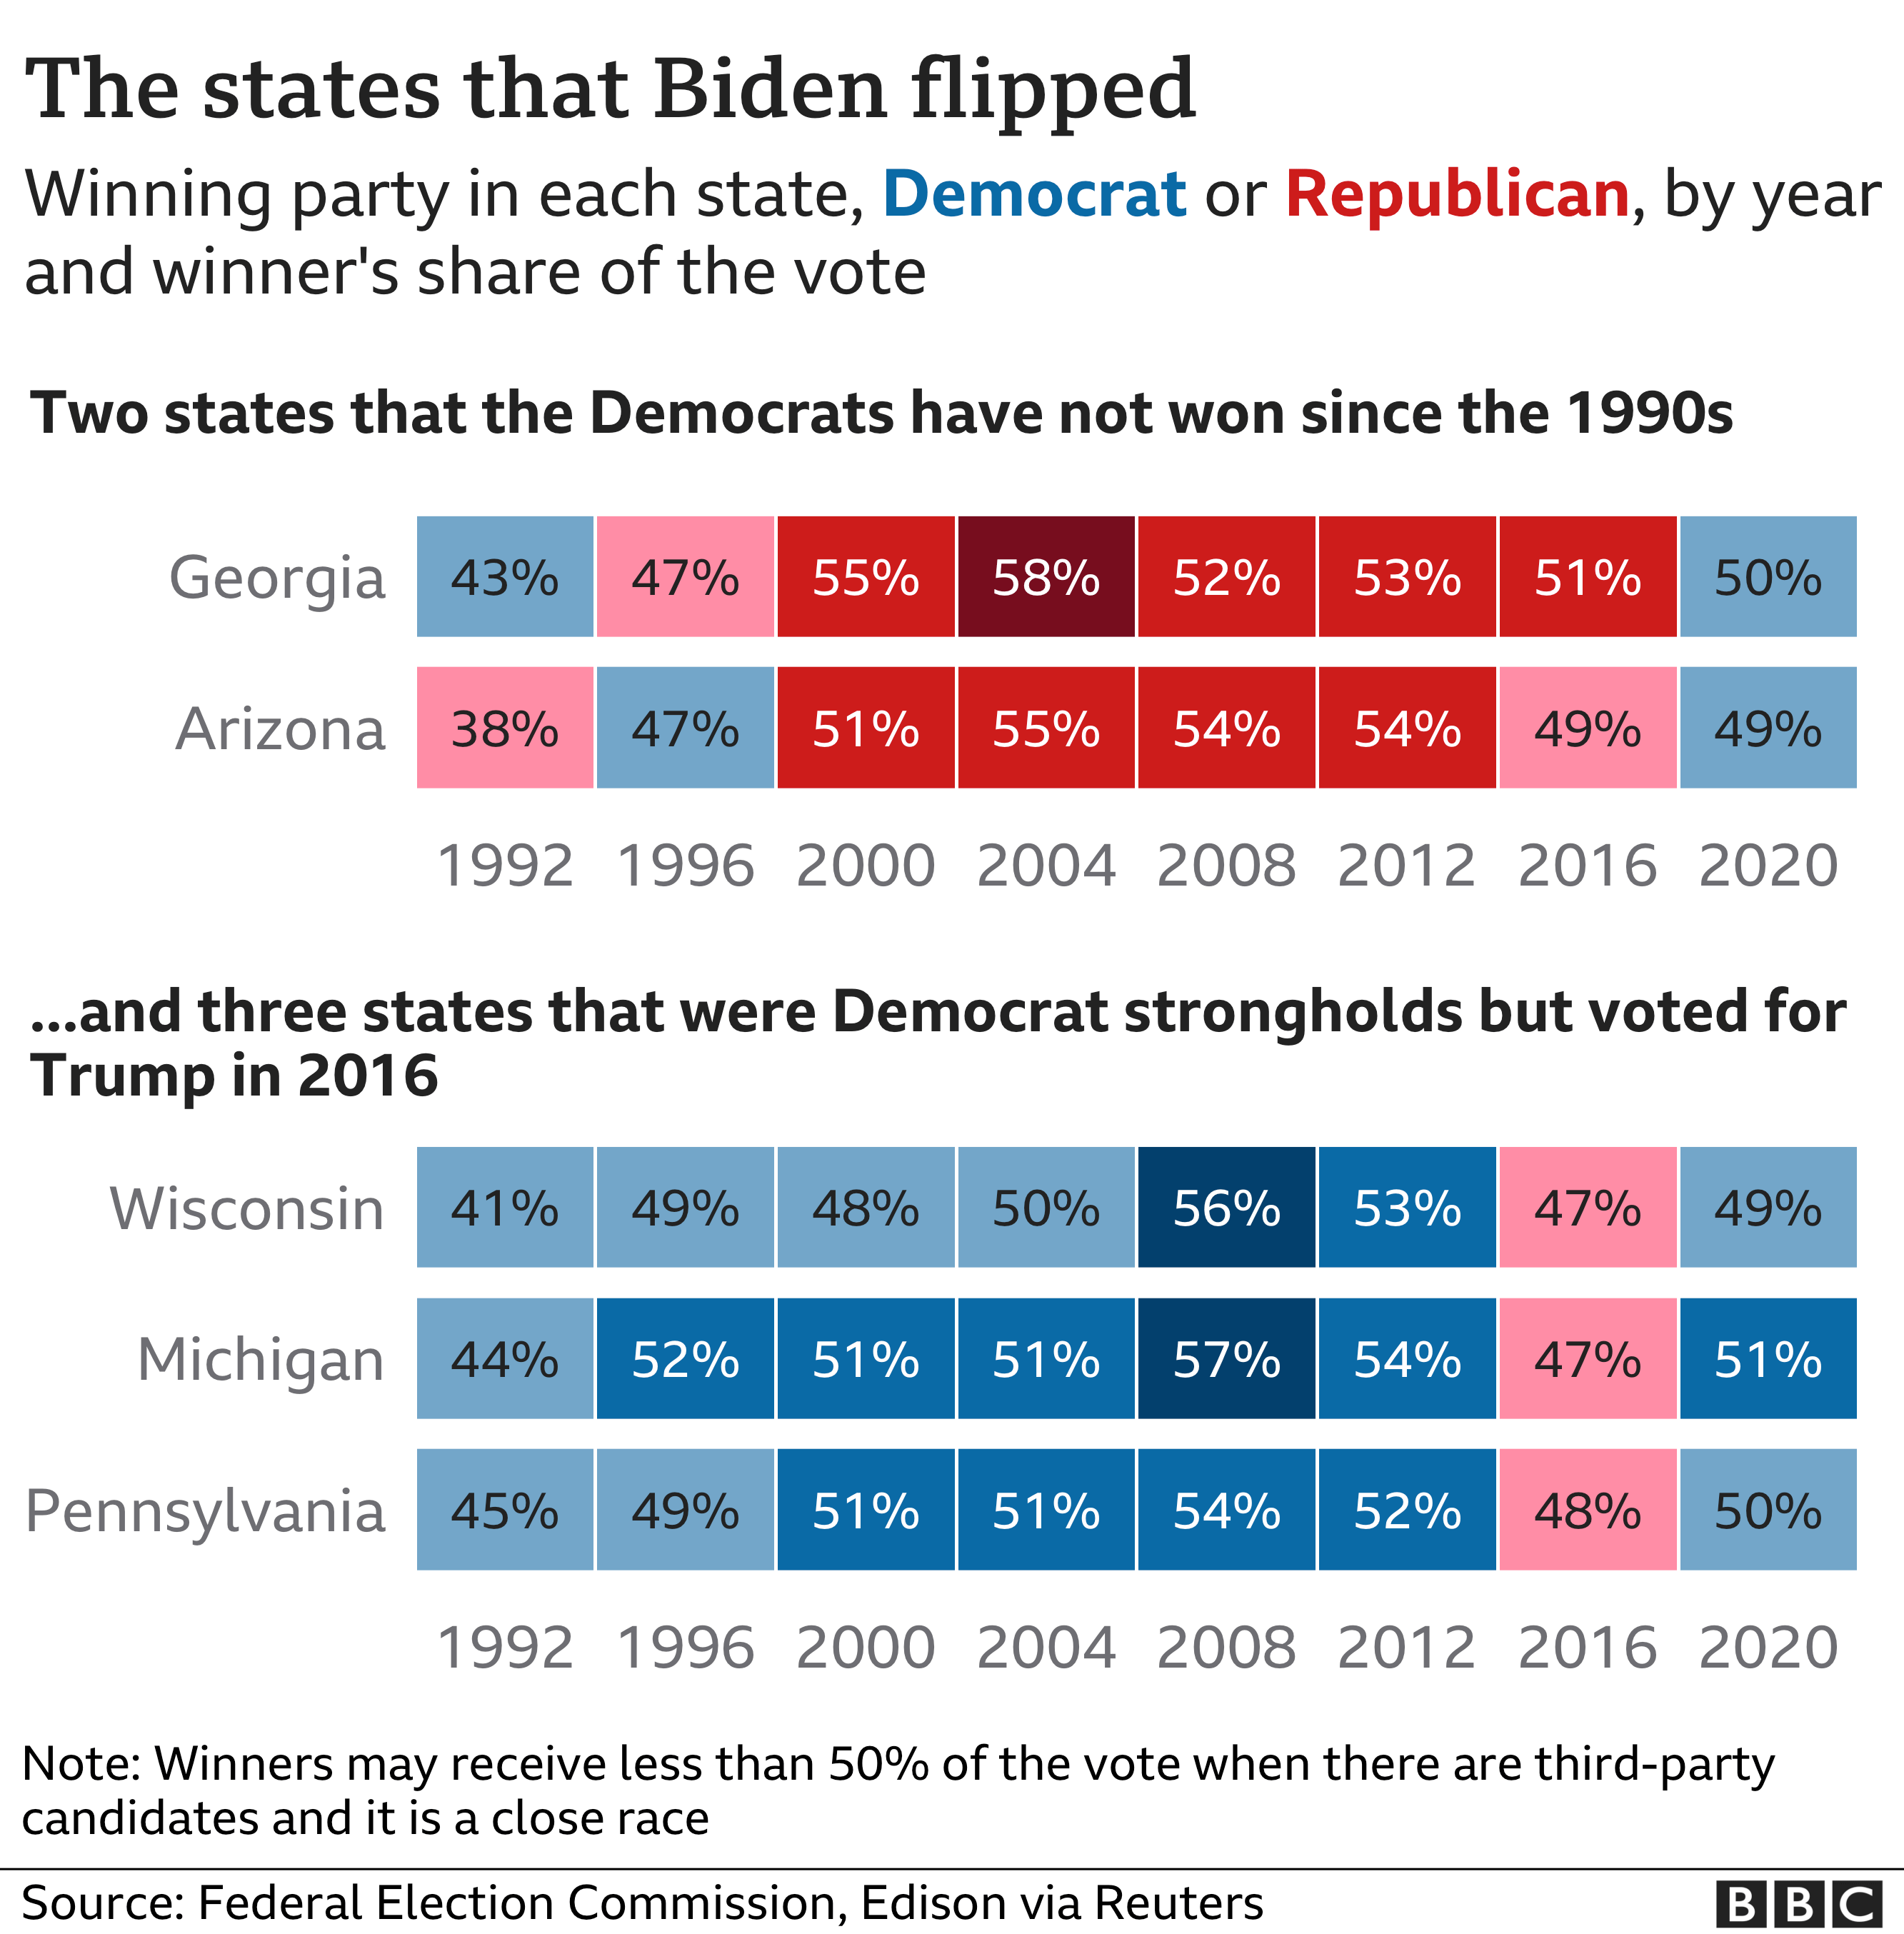 Time series chart showing election data for states that Biden has won from Trump